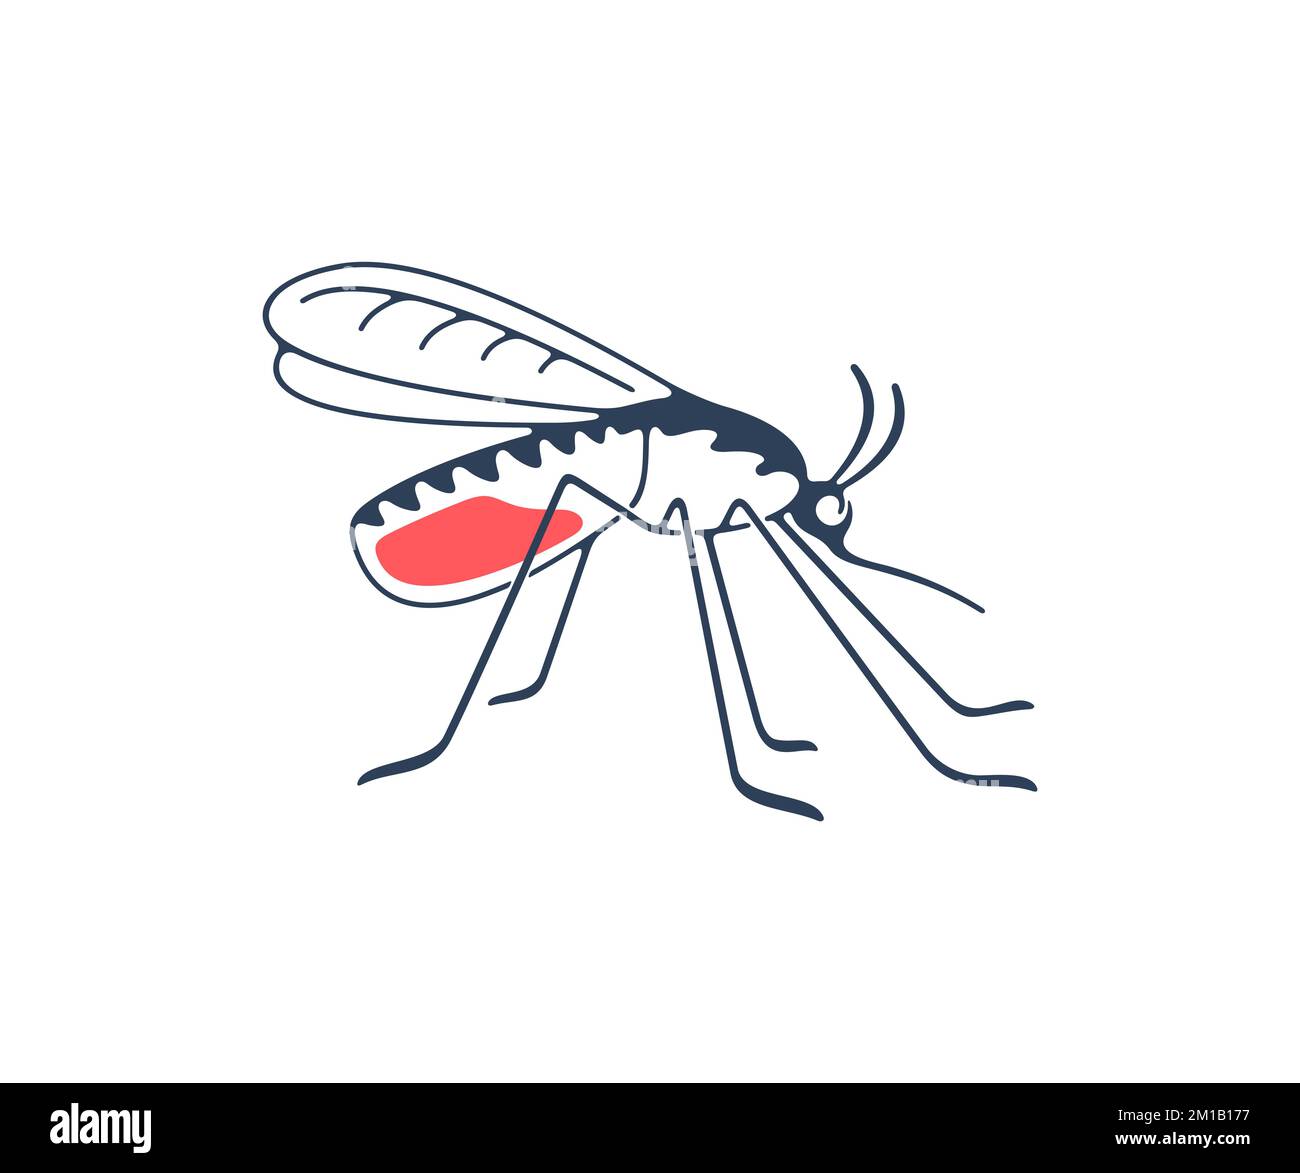 Mosquito, insects, animals, nature and medicine, graphic design. Gnat, insect bloodsucking, pest infectious parasitic spreading, malaria and disease Stock Vector